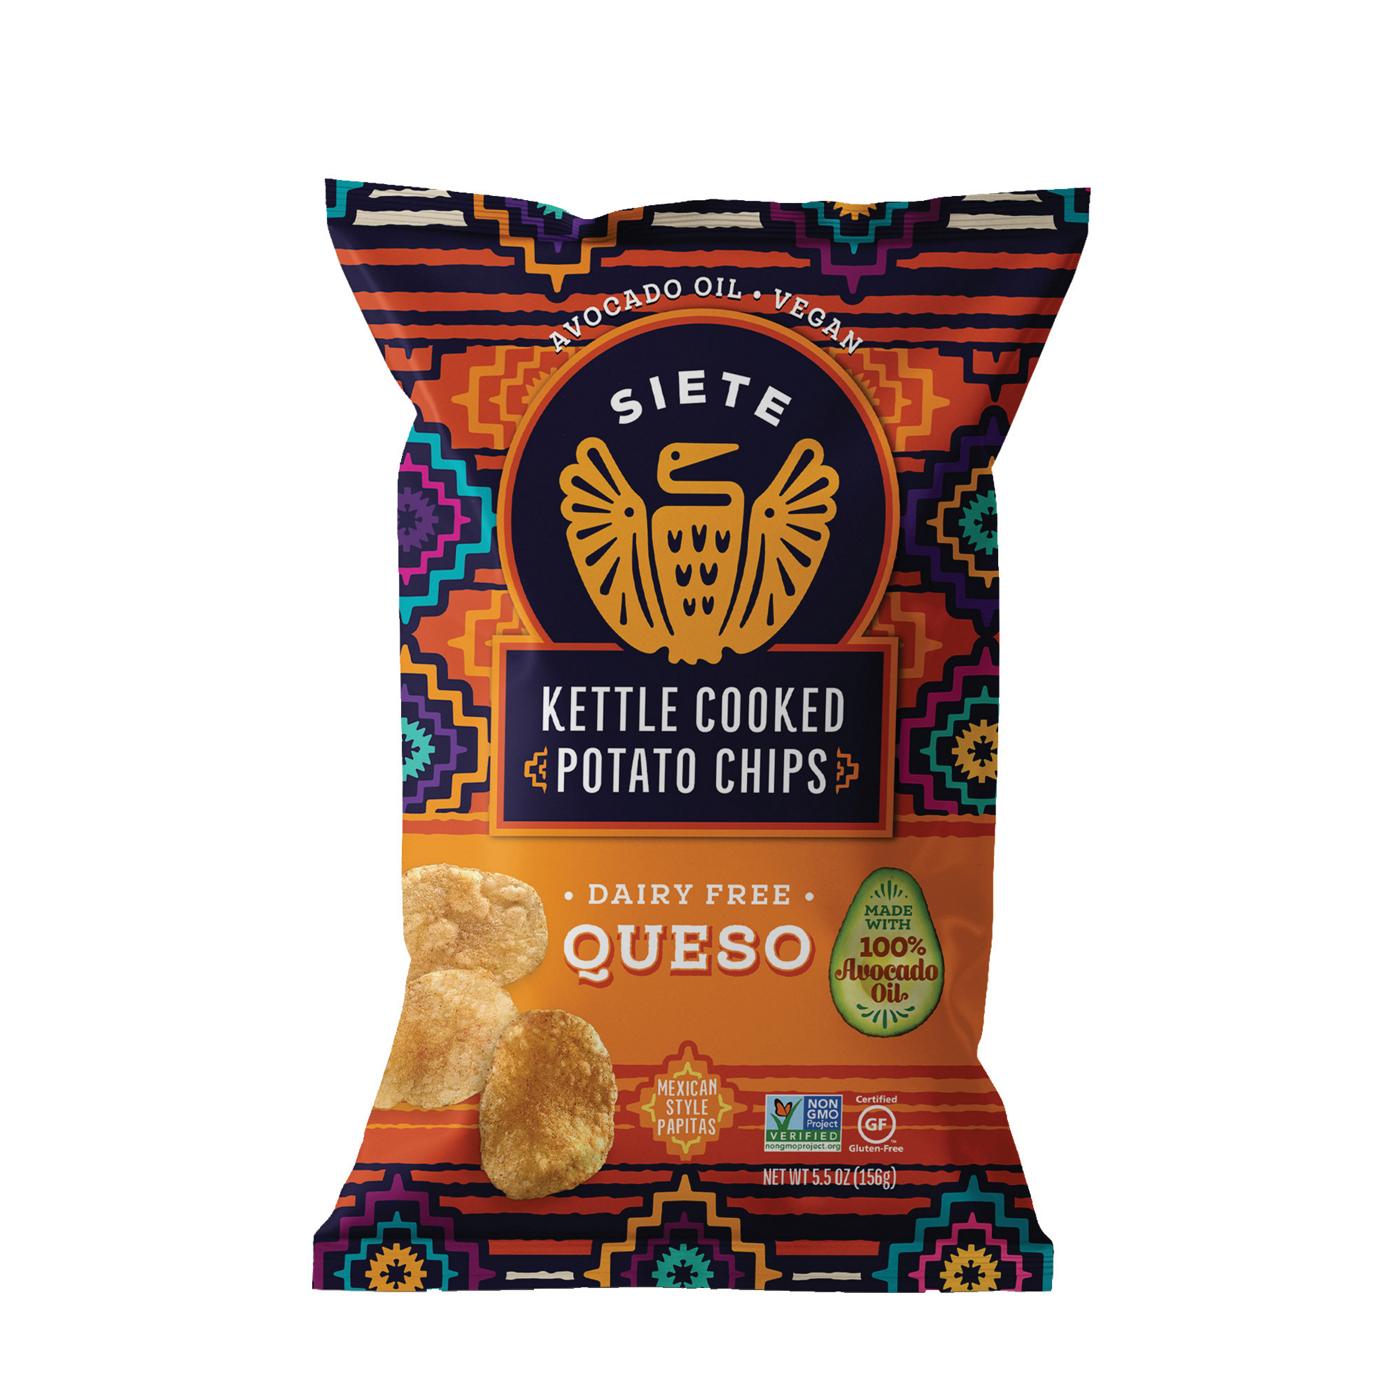 Siete Dairy Free Queso Kettle Cooked Potato Chips; image 1 of 2